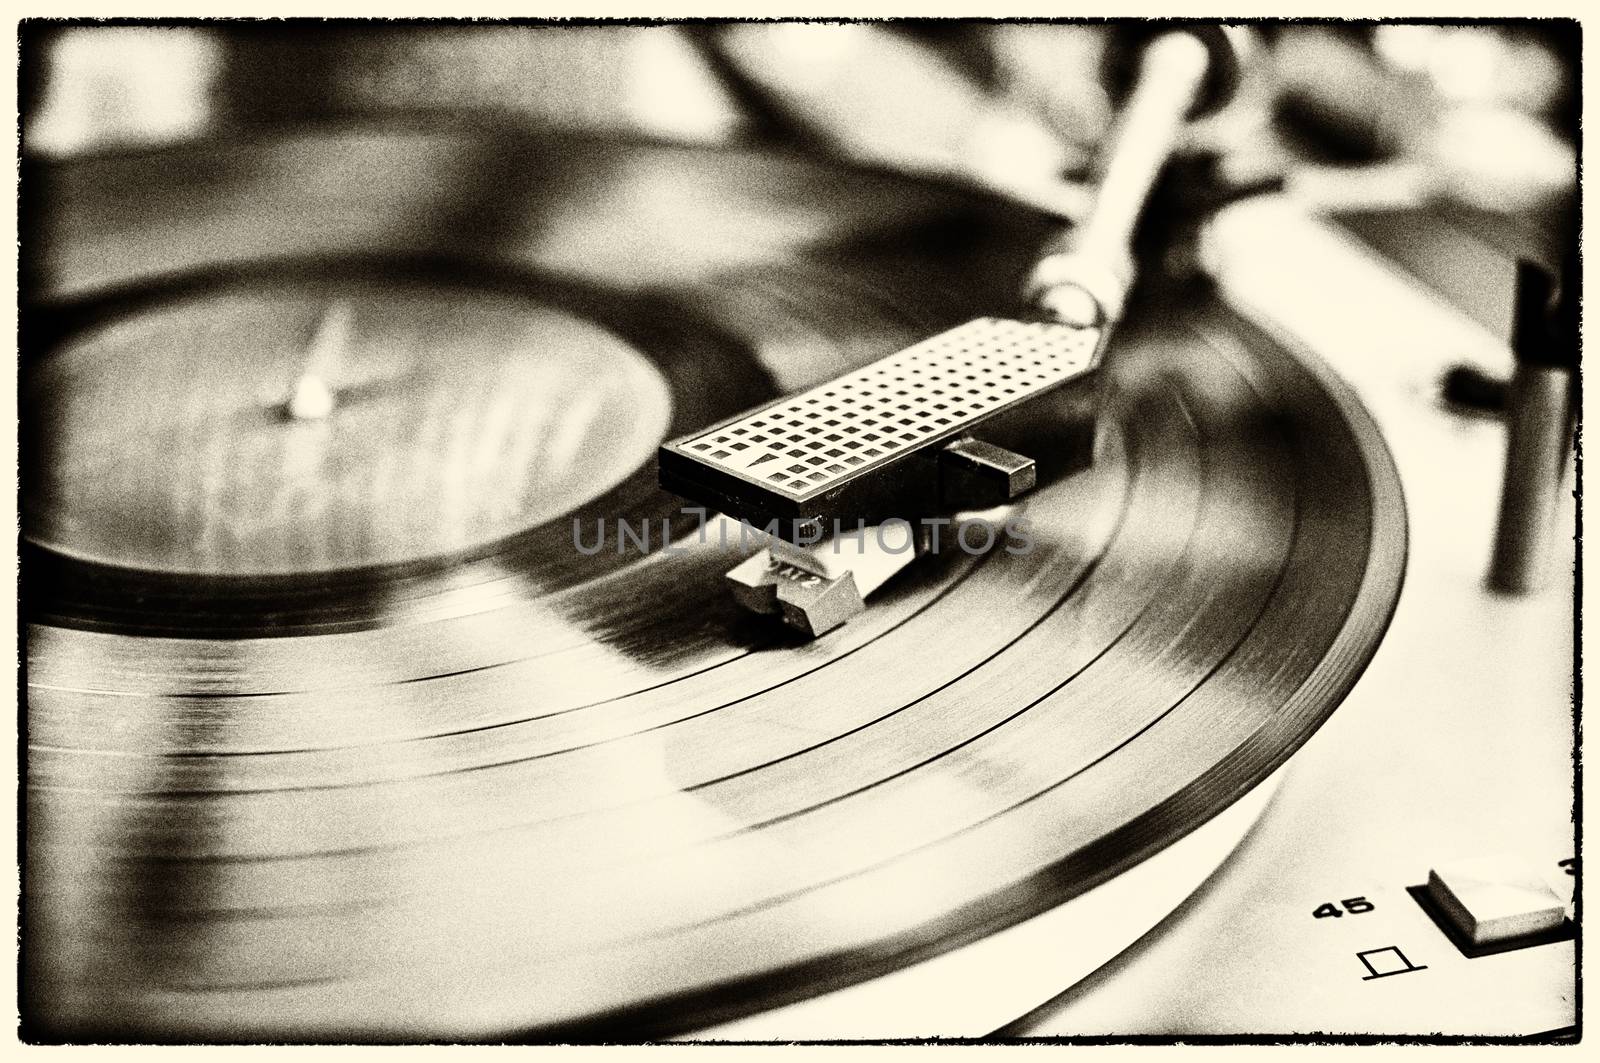 Textured retro image in black and white with border of vinyl record player.